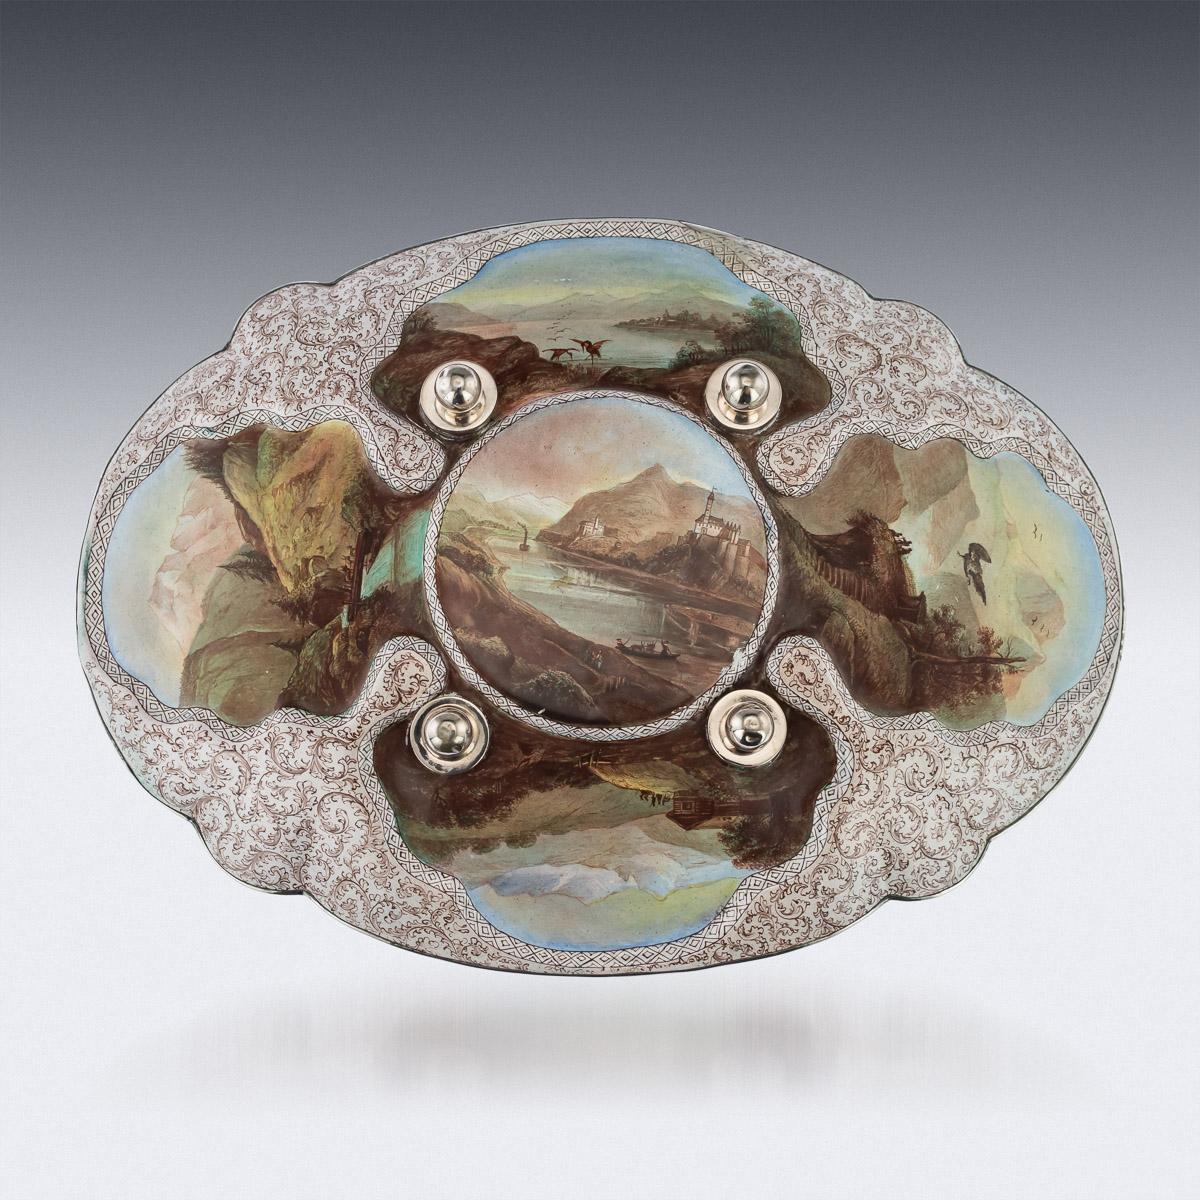 Antique 19th century Austrian hand-painted enamel dish applied with silver mounts. The scallop-shaped dish with a saucer centred with five reserves depicting various religious scenes, surrounded by scrolling foliage, masks and raised on four ball